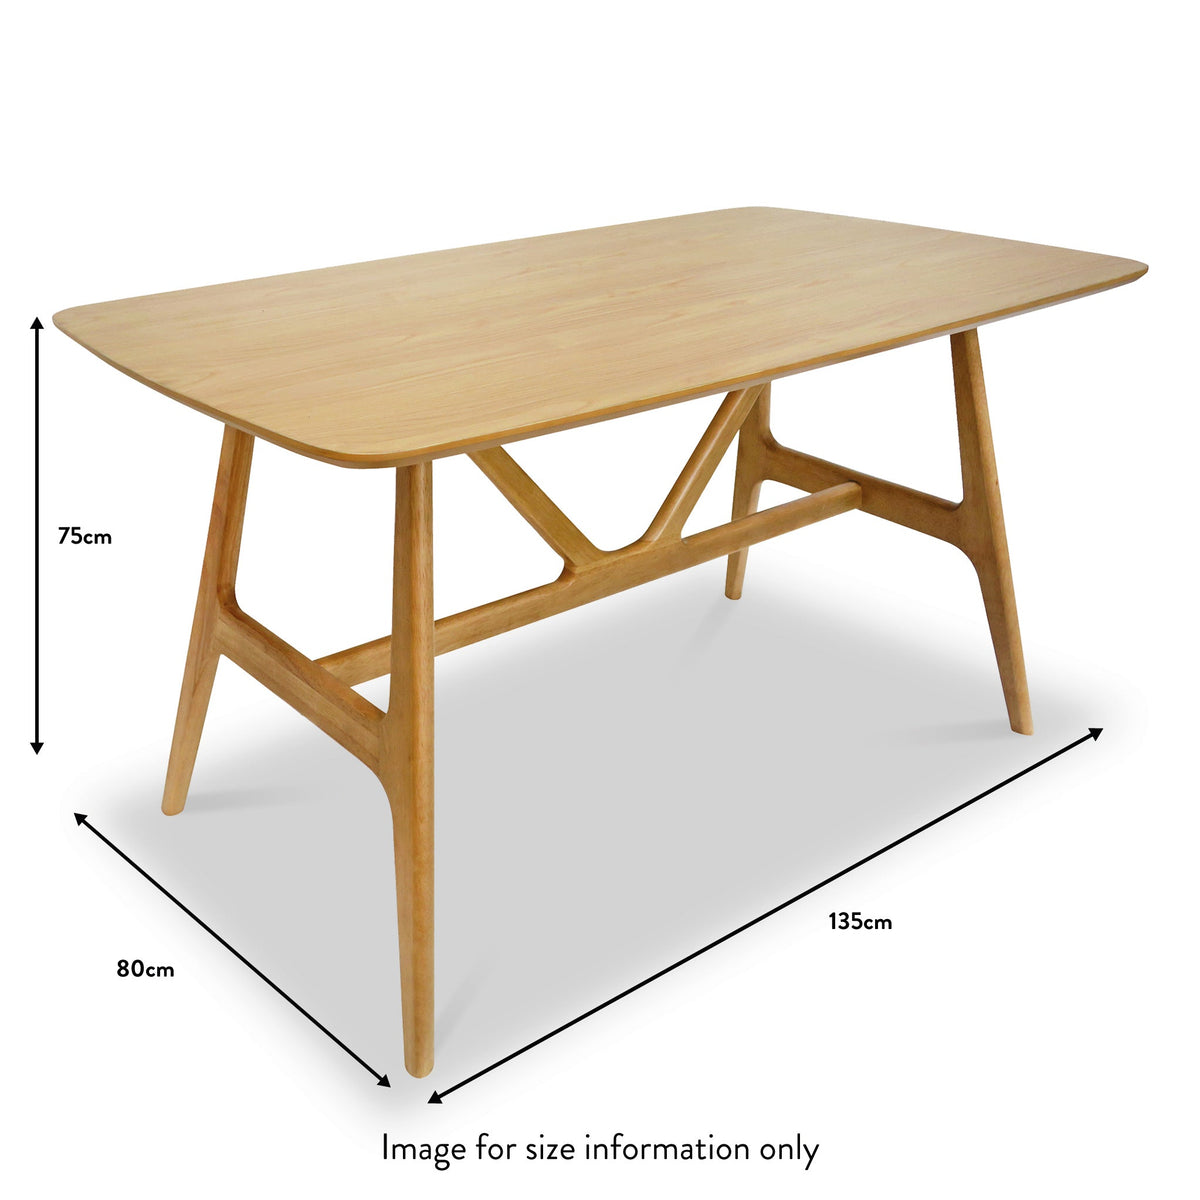 Ronnie Oak Rectangular Dining Table dimensions